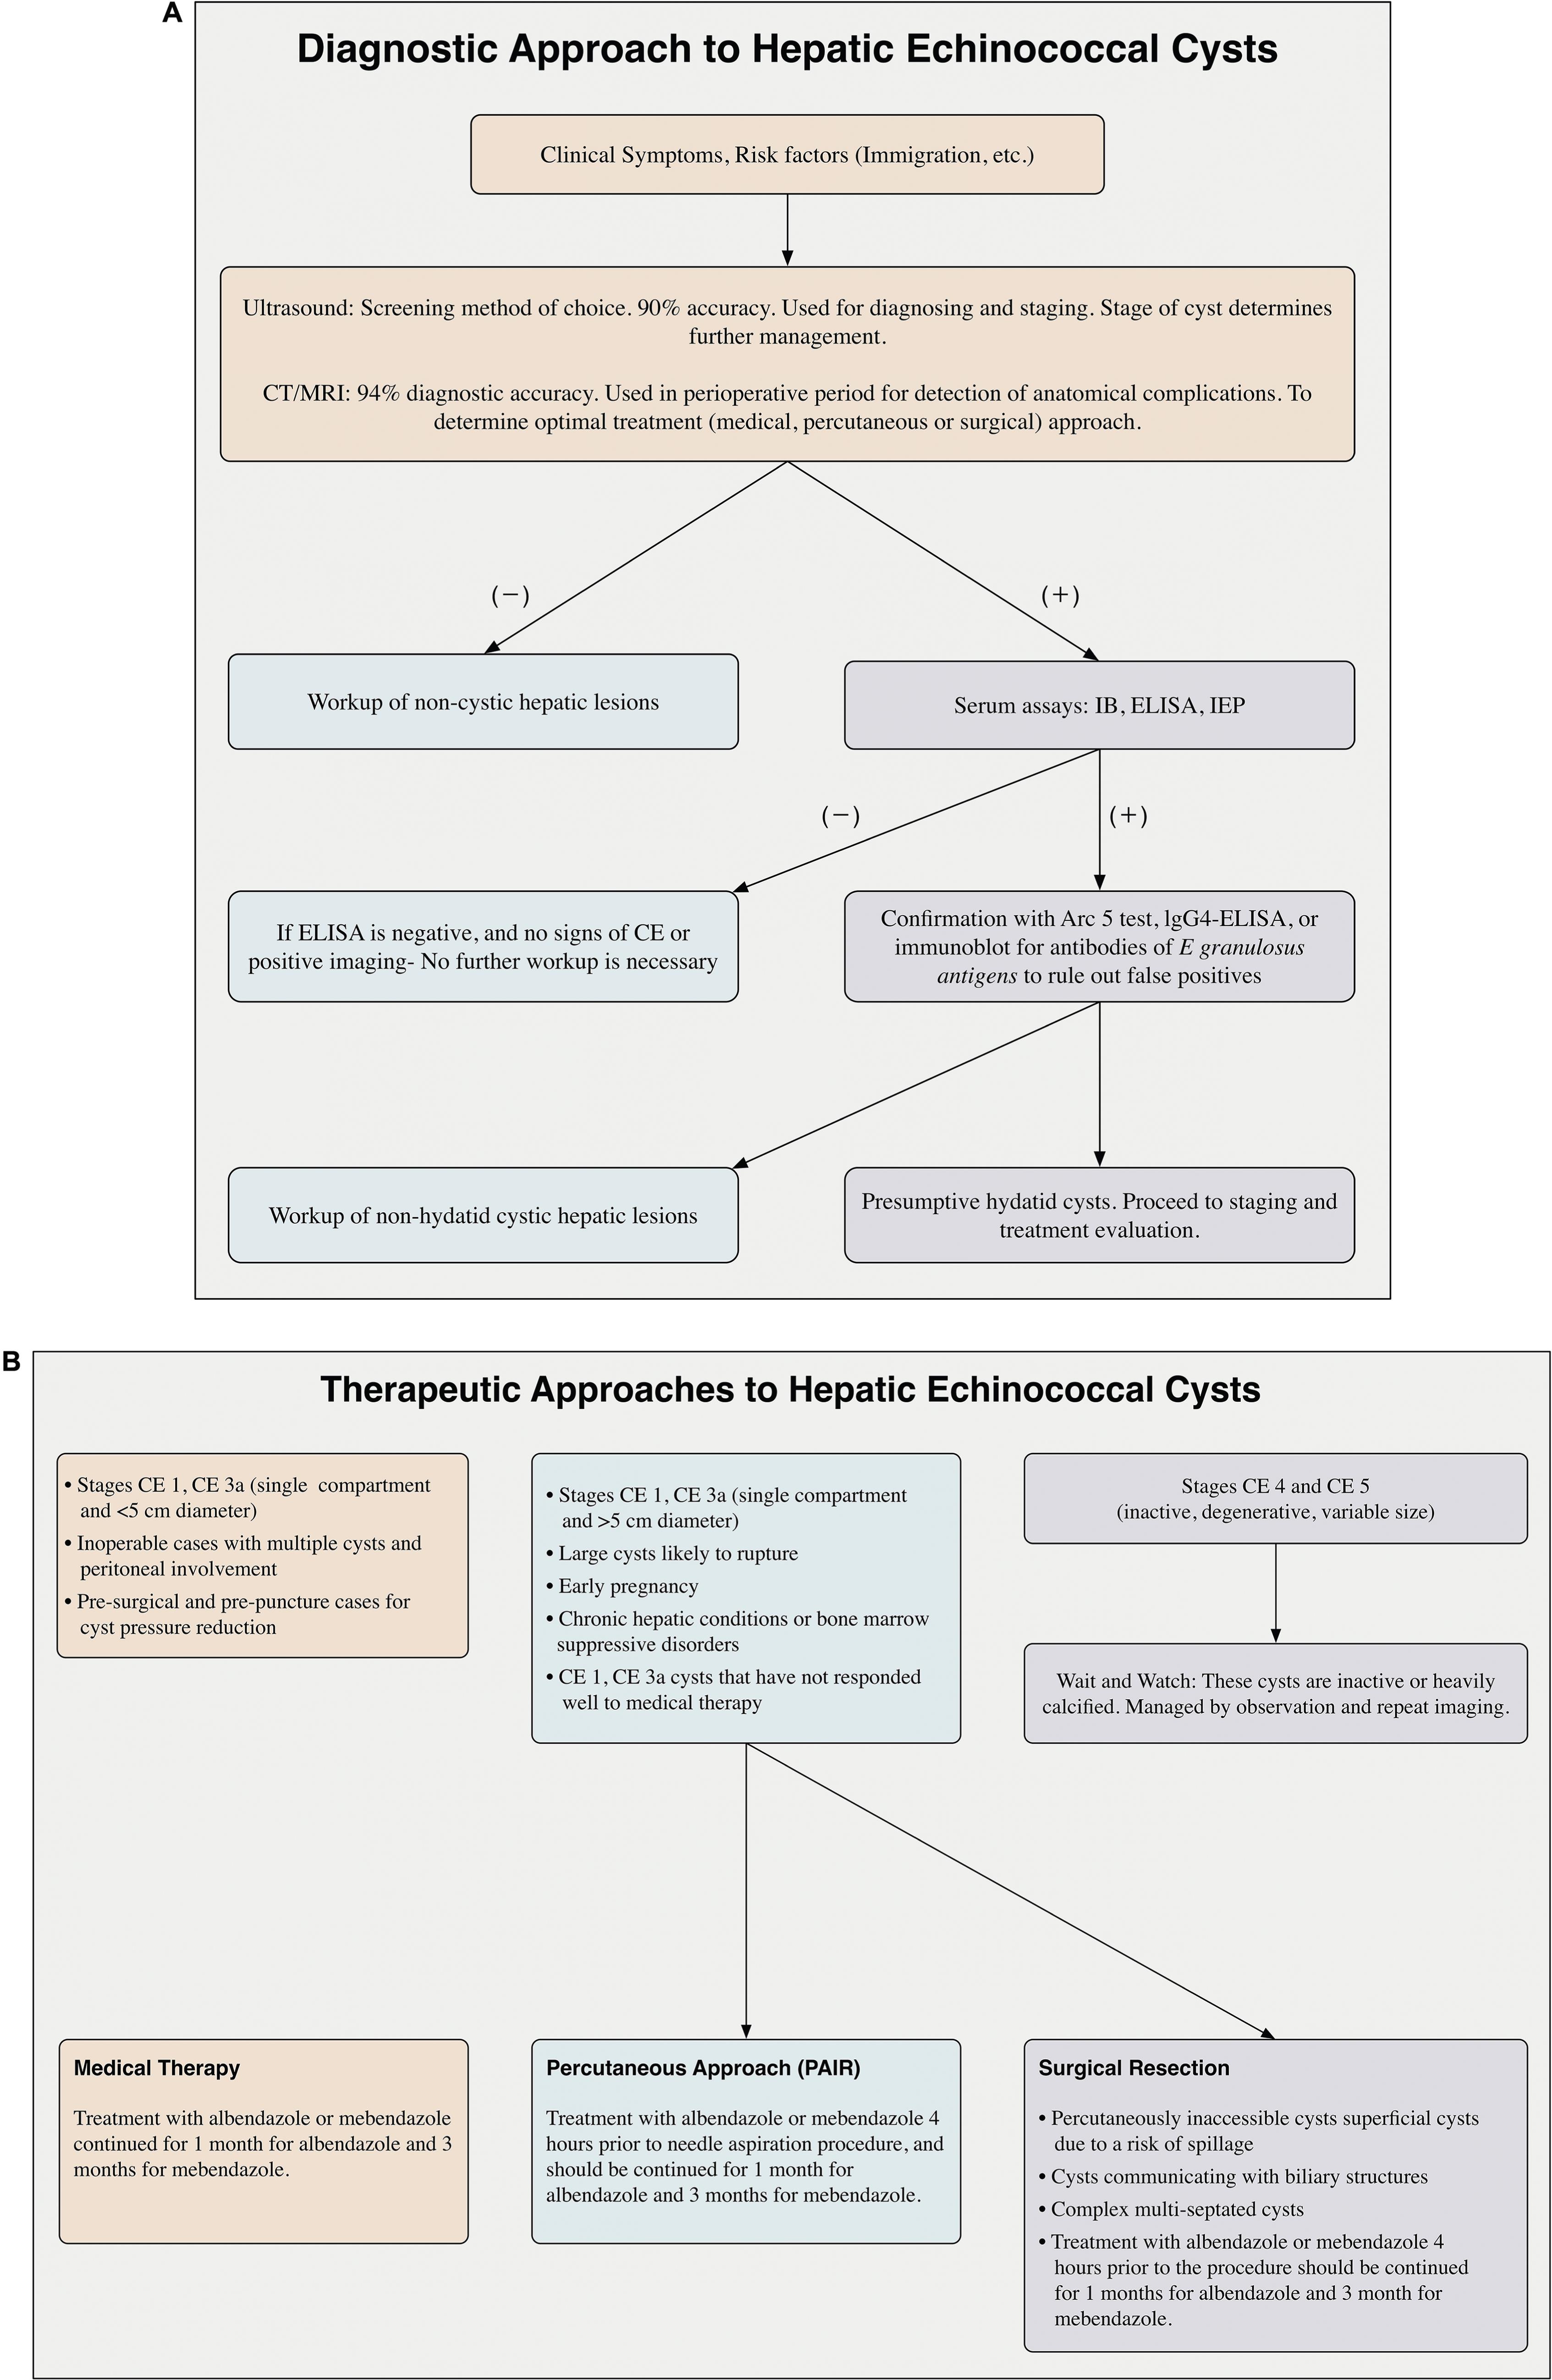 Management algorithms for cystic echinococcosis.